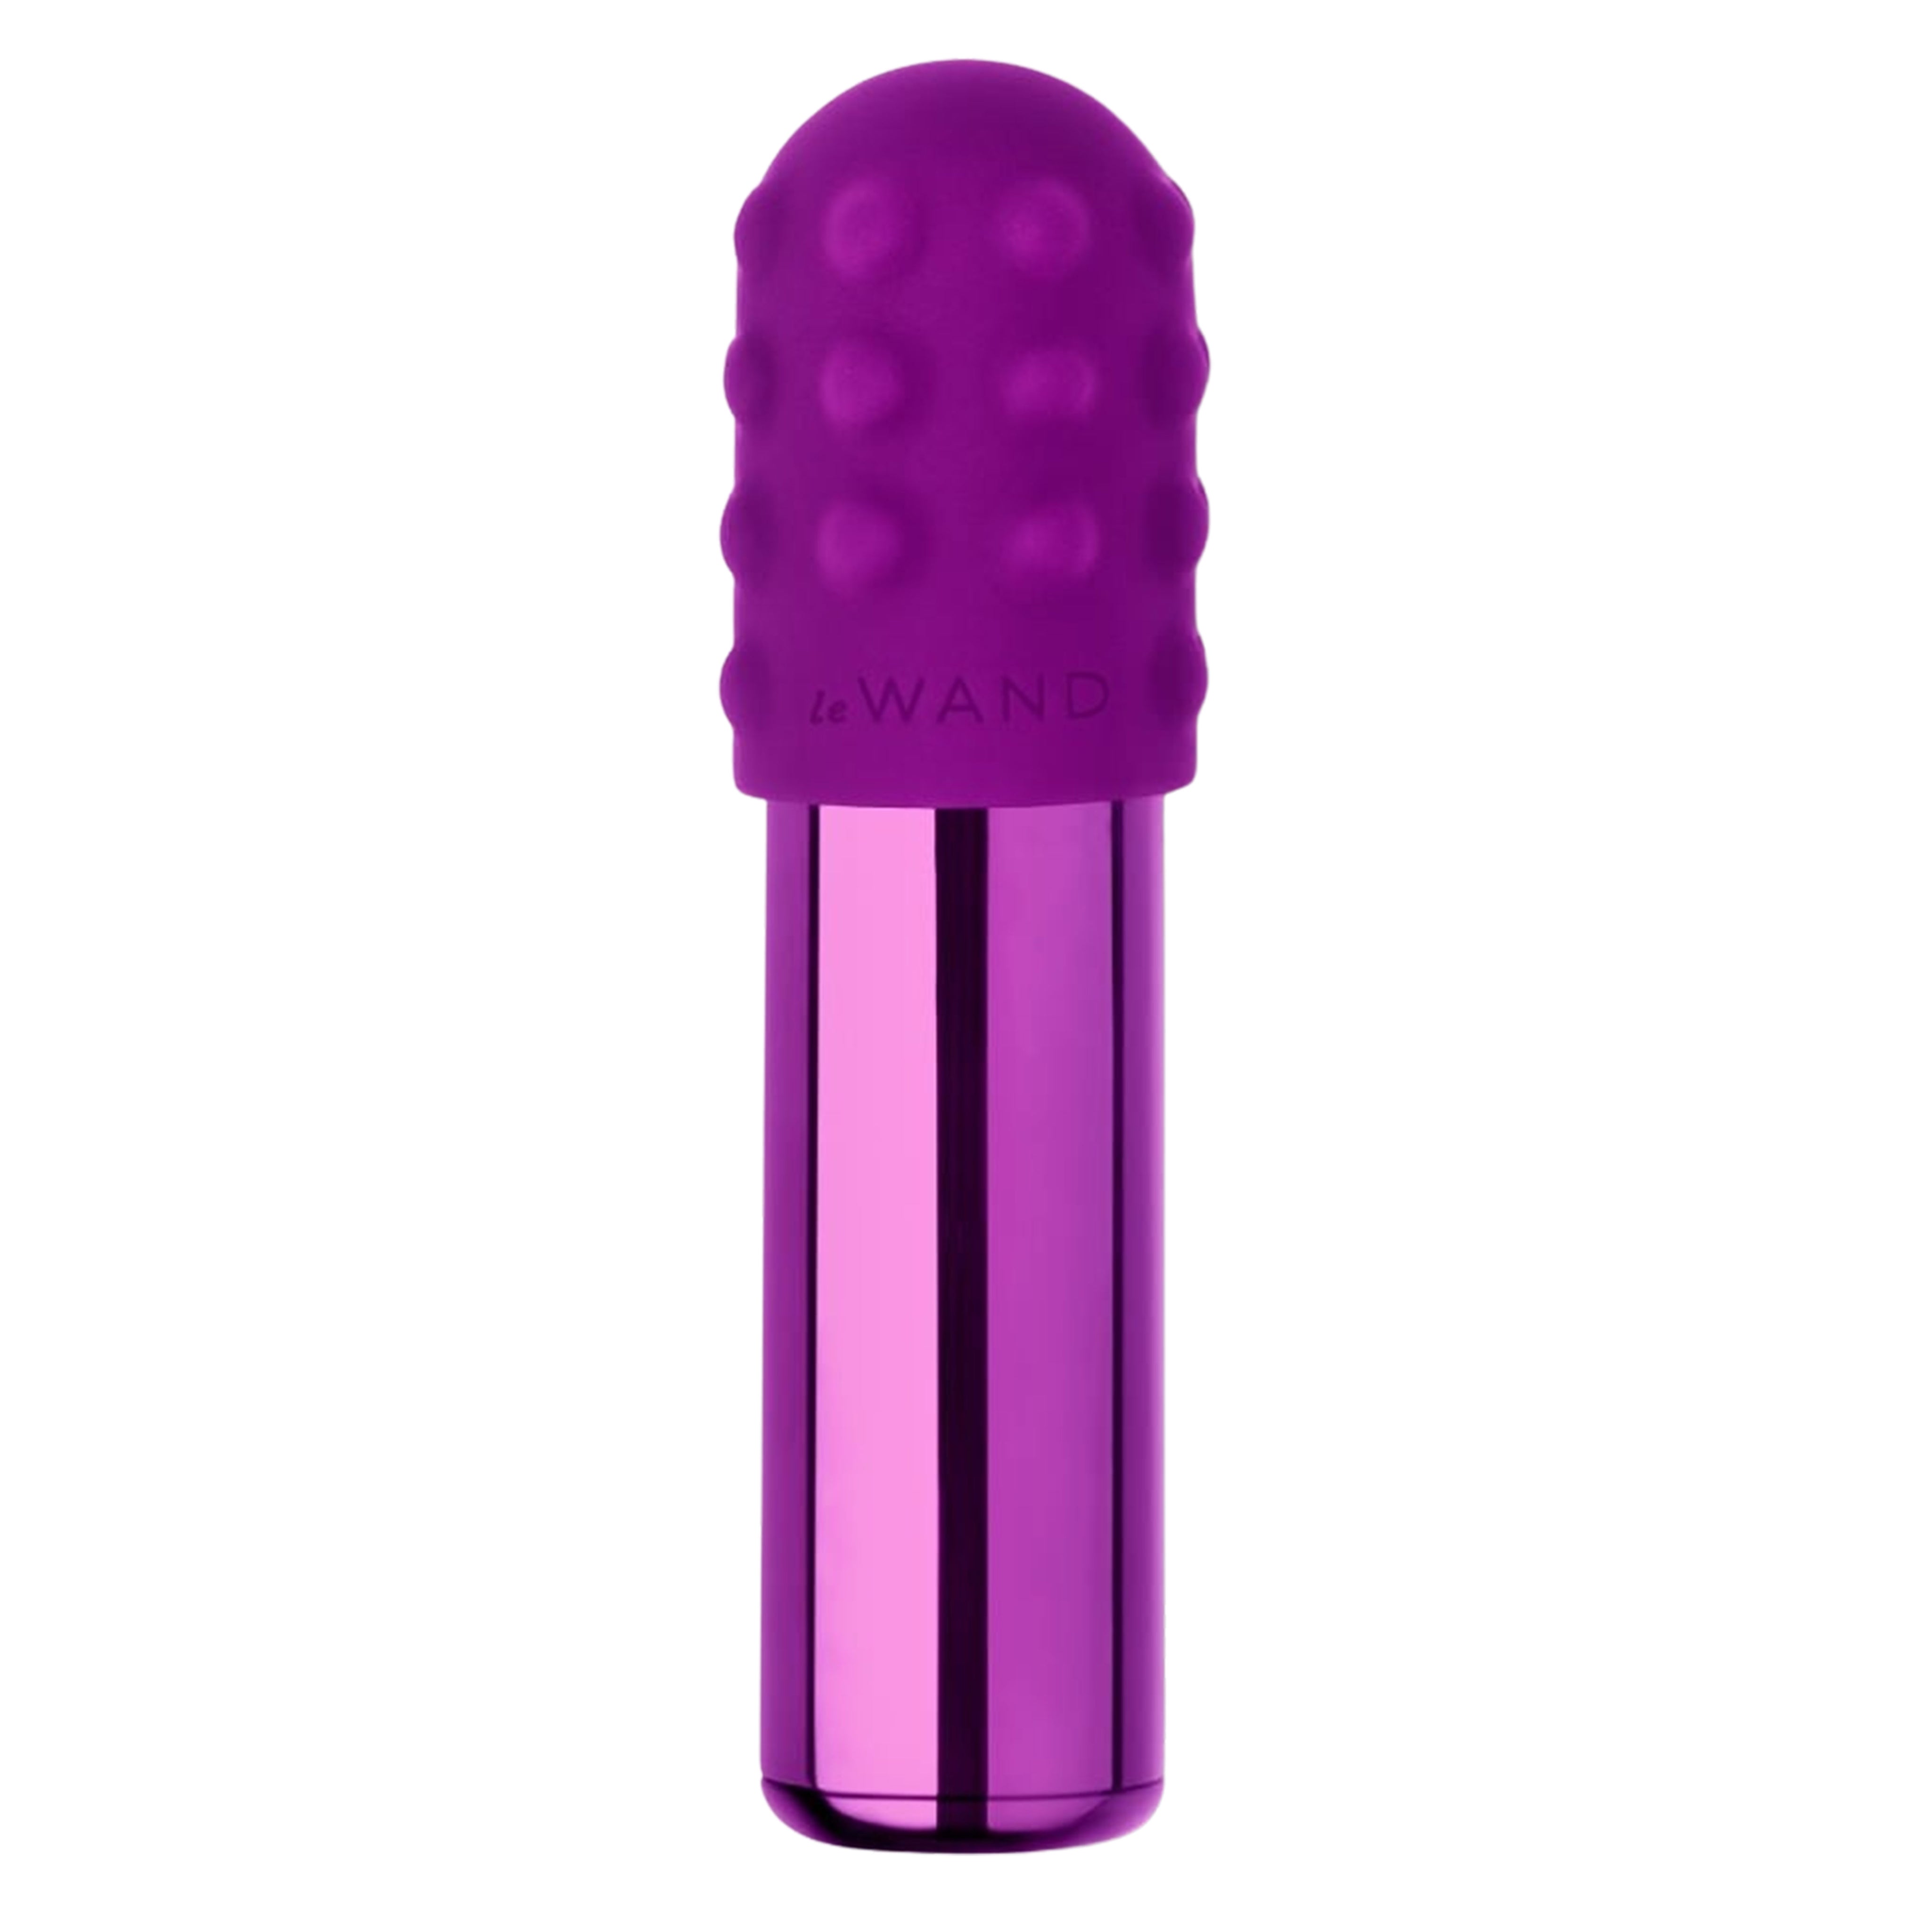 Textured Silicone Sleeve and Ring Mini Vibrating Bullet